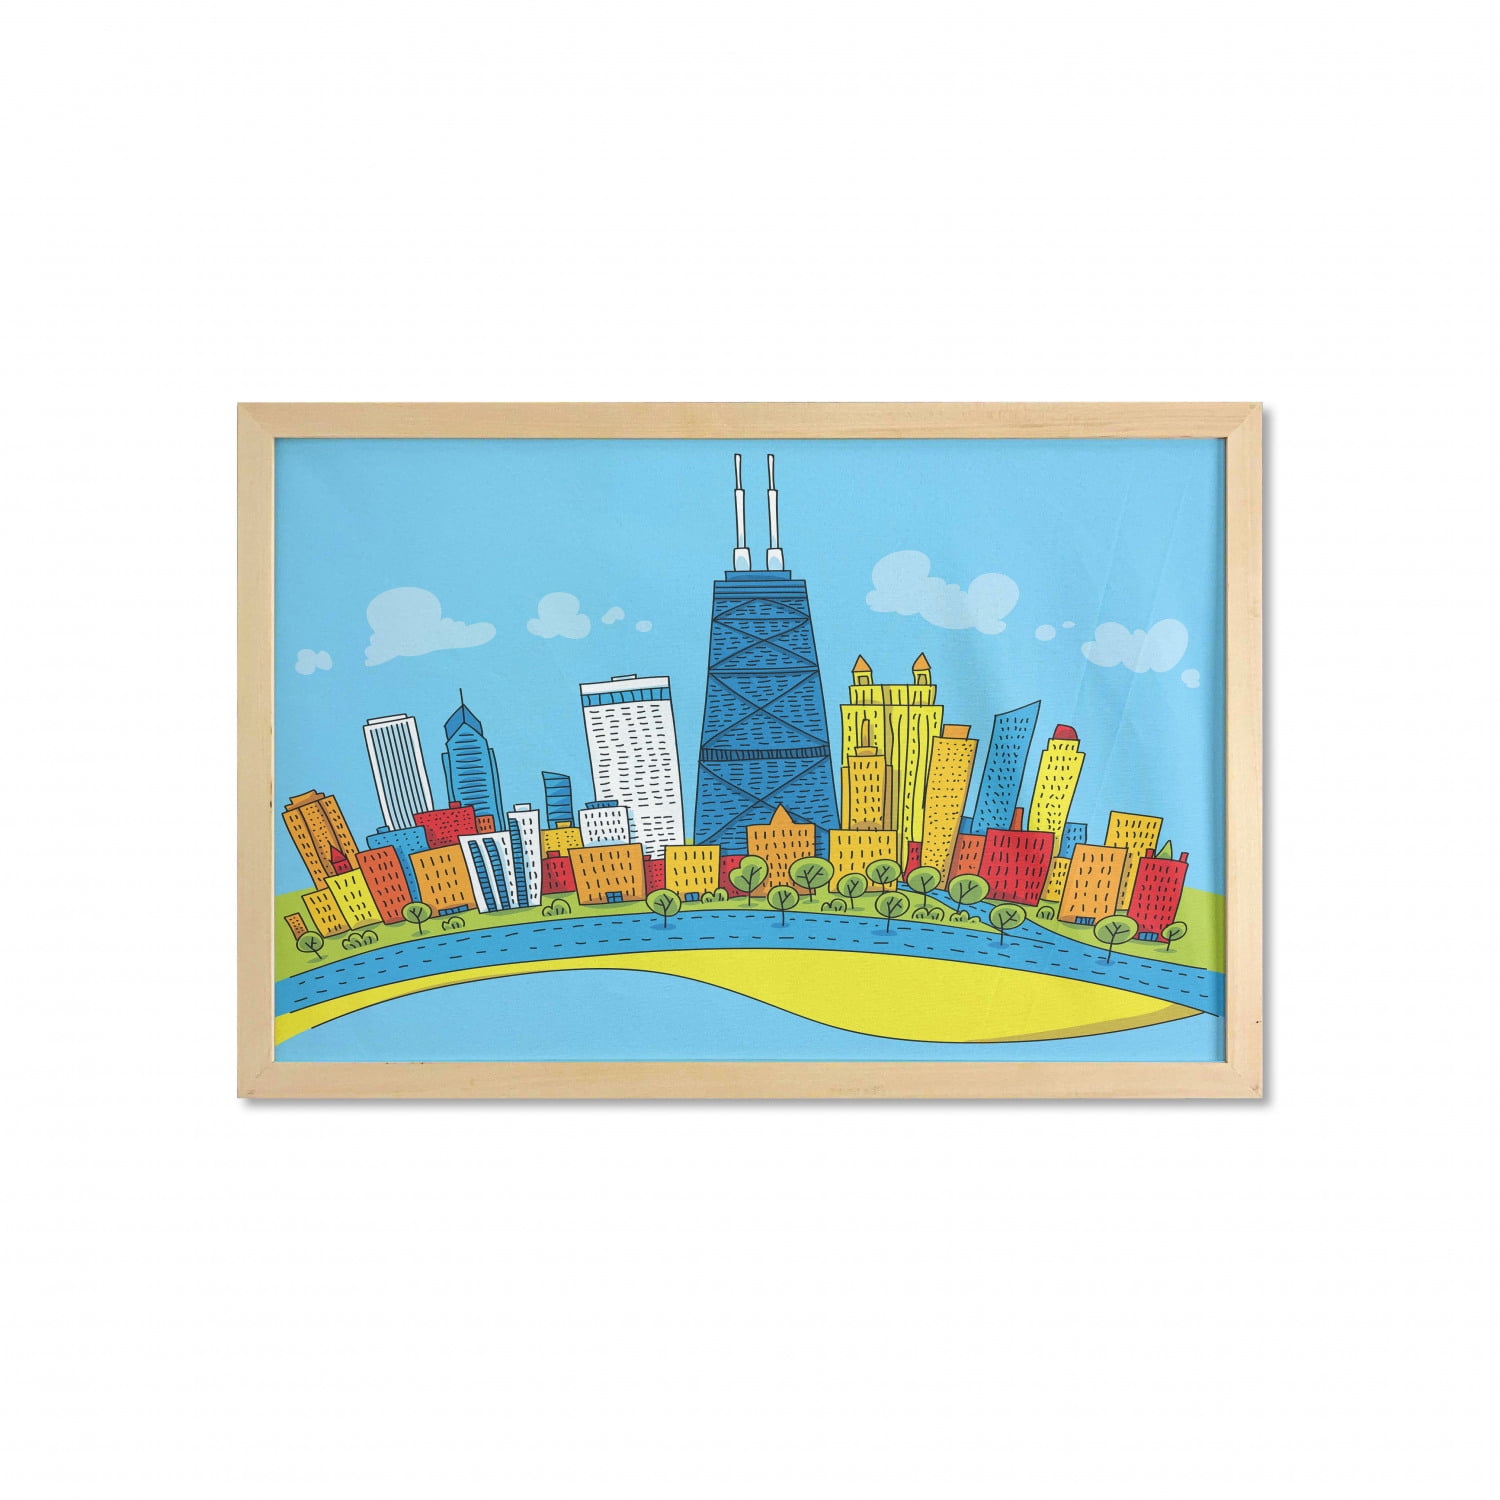 Chicago Skyline Wall Art with Frame, Cartoon Style City View with Colorful  Buildings Caricature, Printed Fabric Poster for Bathroom Living Room Dorms,  35